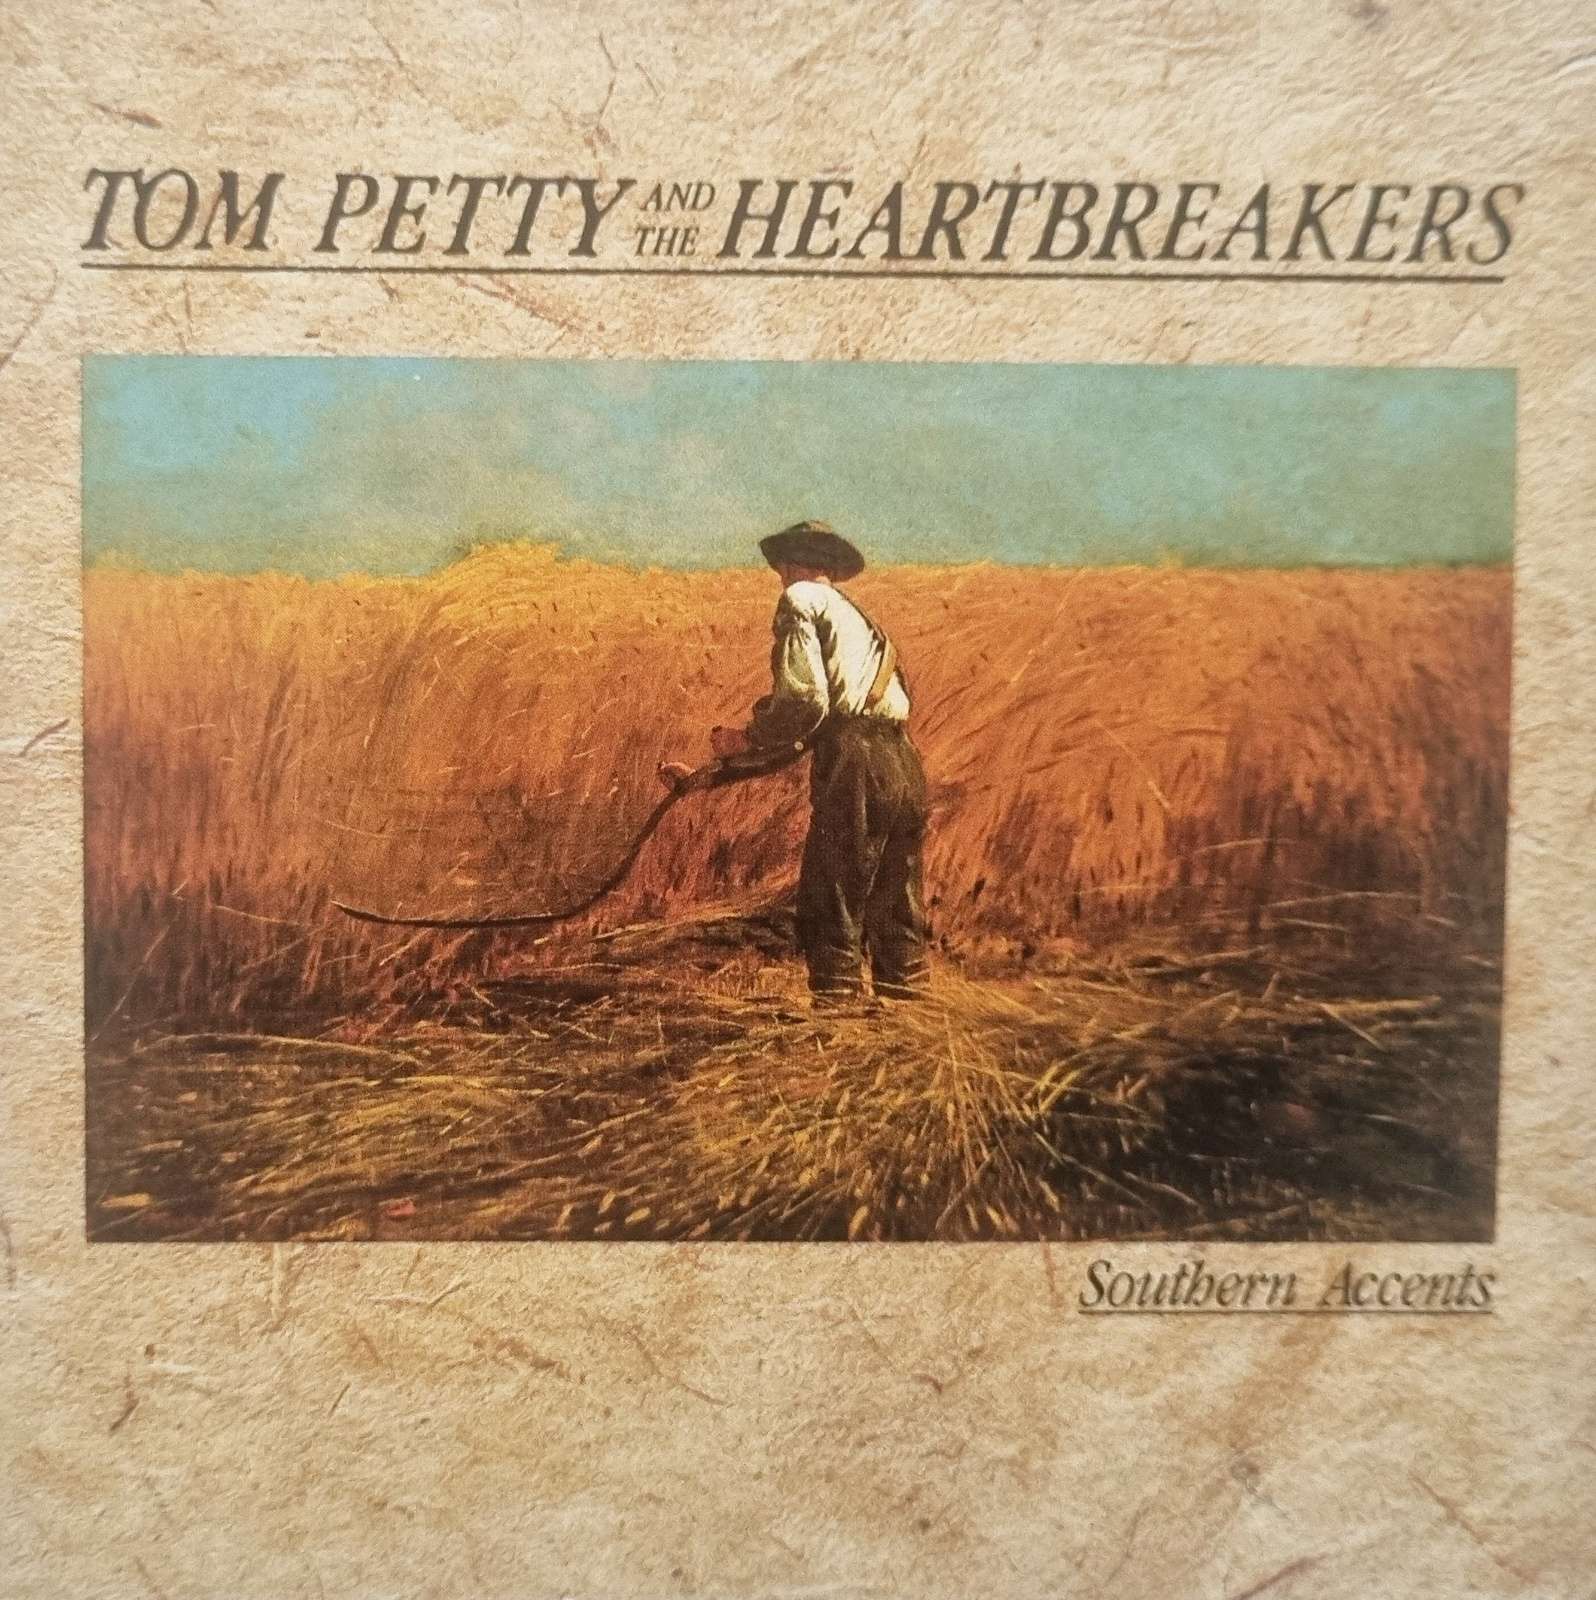 Tom Petty & the Heartbreakers - Southern Accents CD